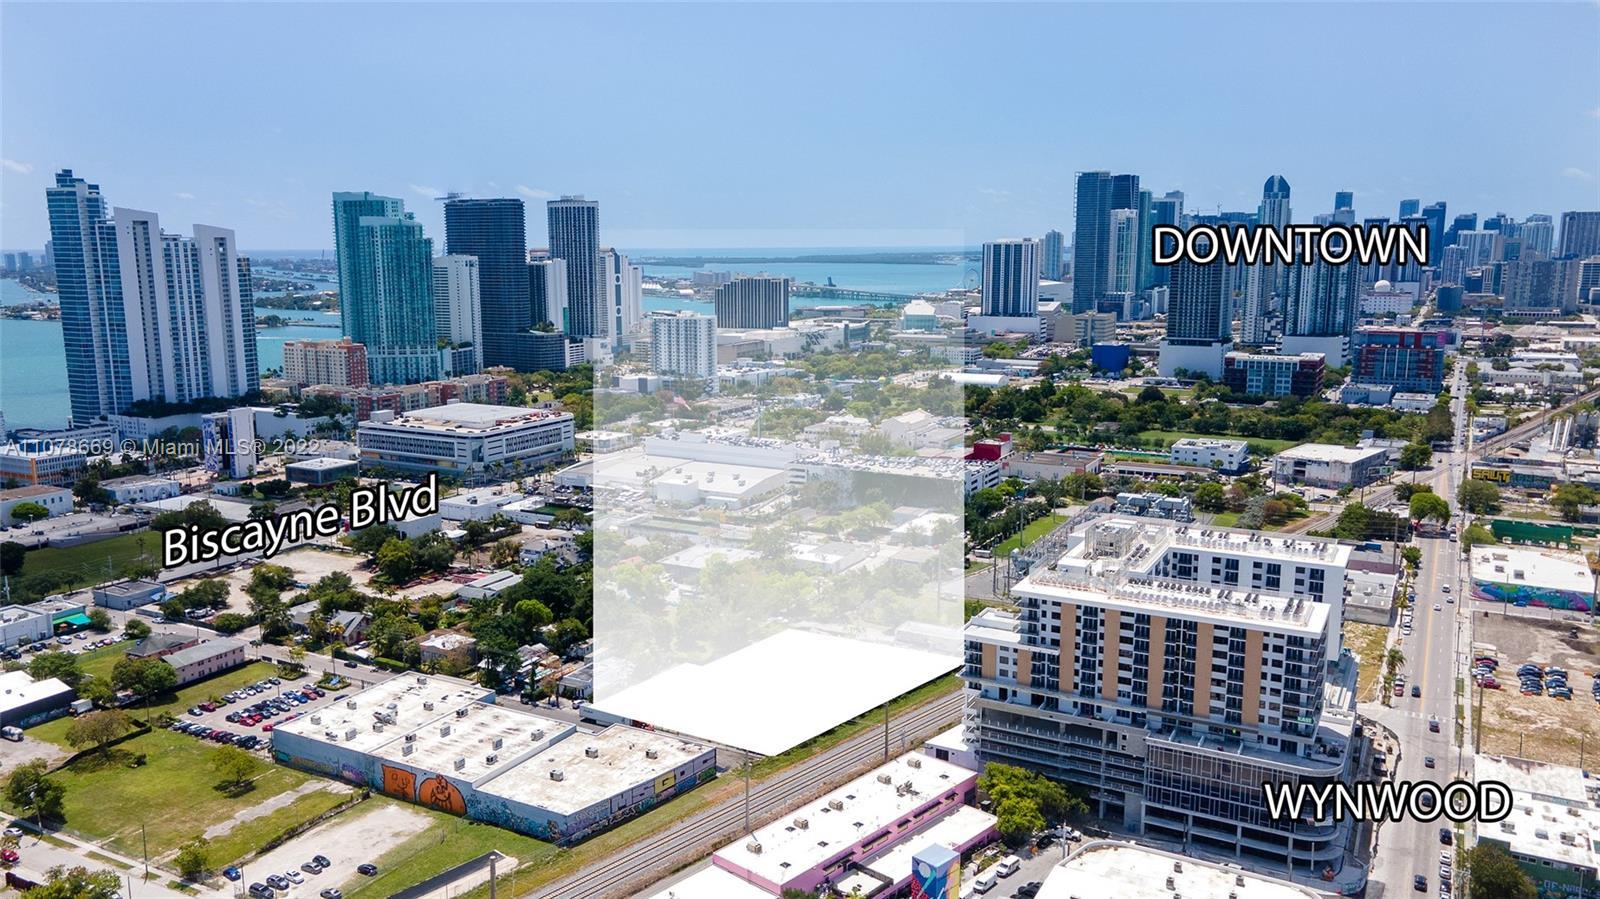 This OZ site consists of 1.3+ acres across 6 contiguous parcels of prime land in Miami's Edgewater n